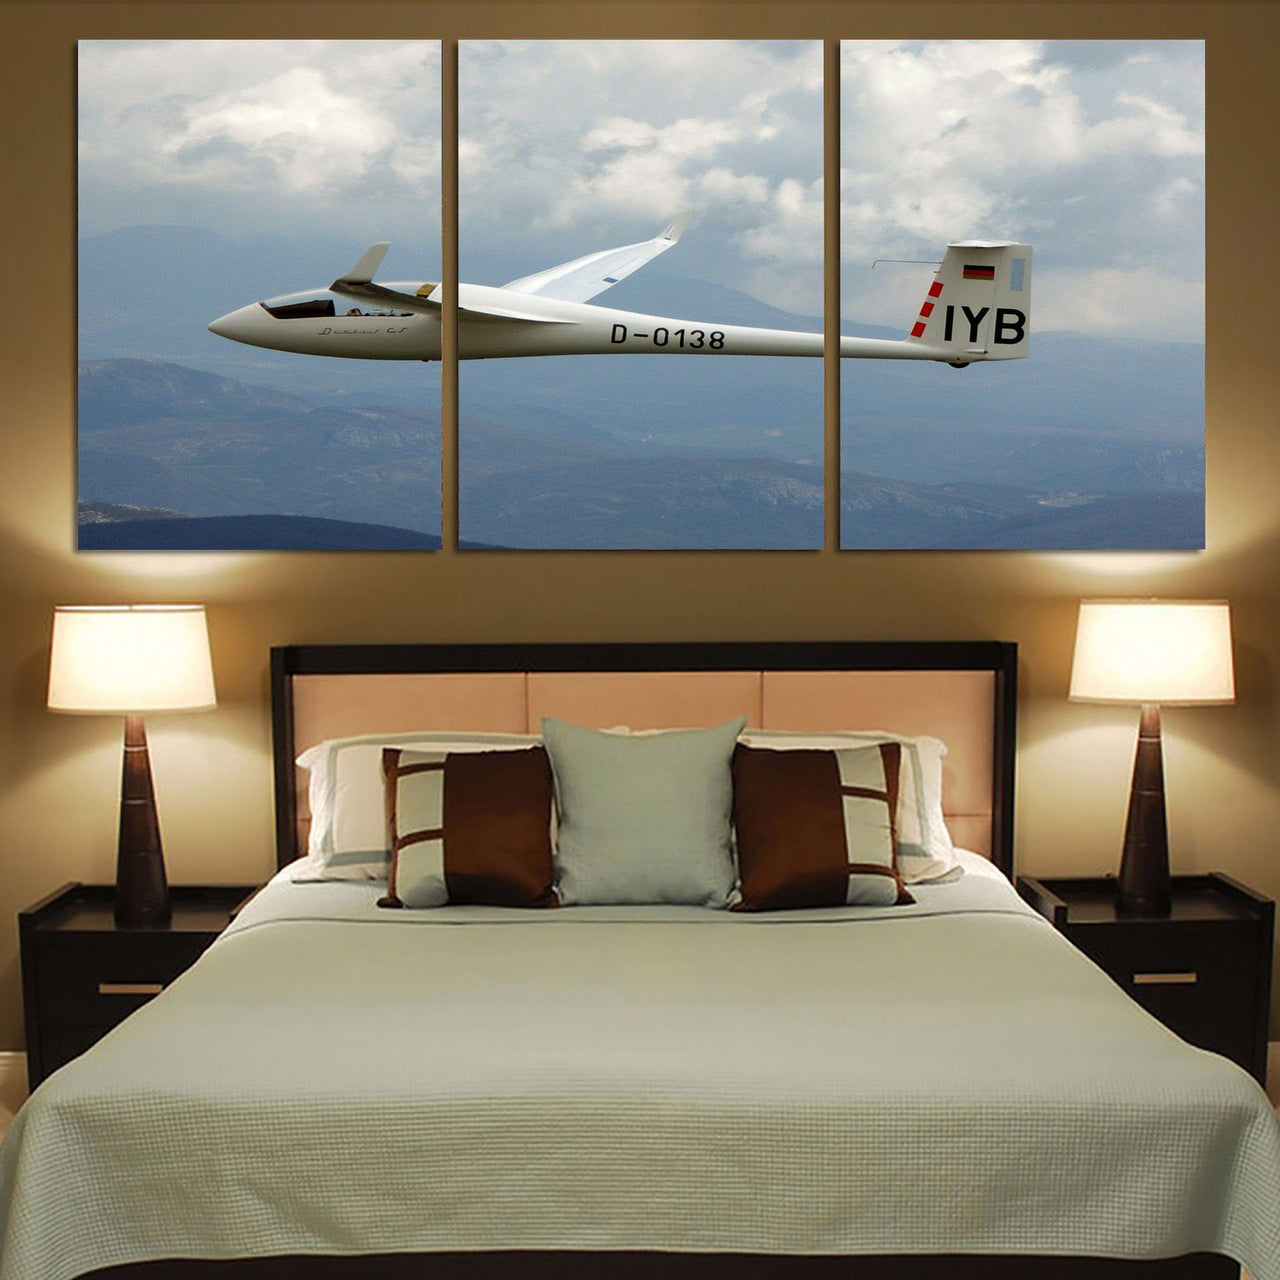 Cruising Glider Printed Canvas Posters (3 Pieces) Aviation Shop 